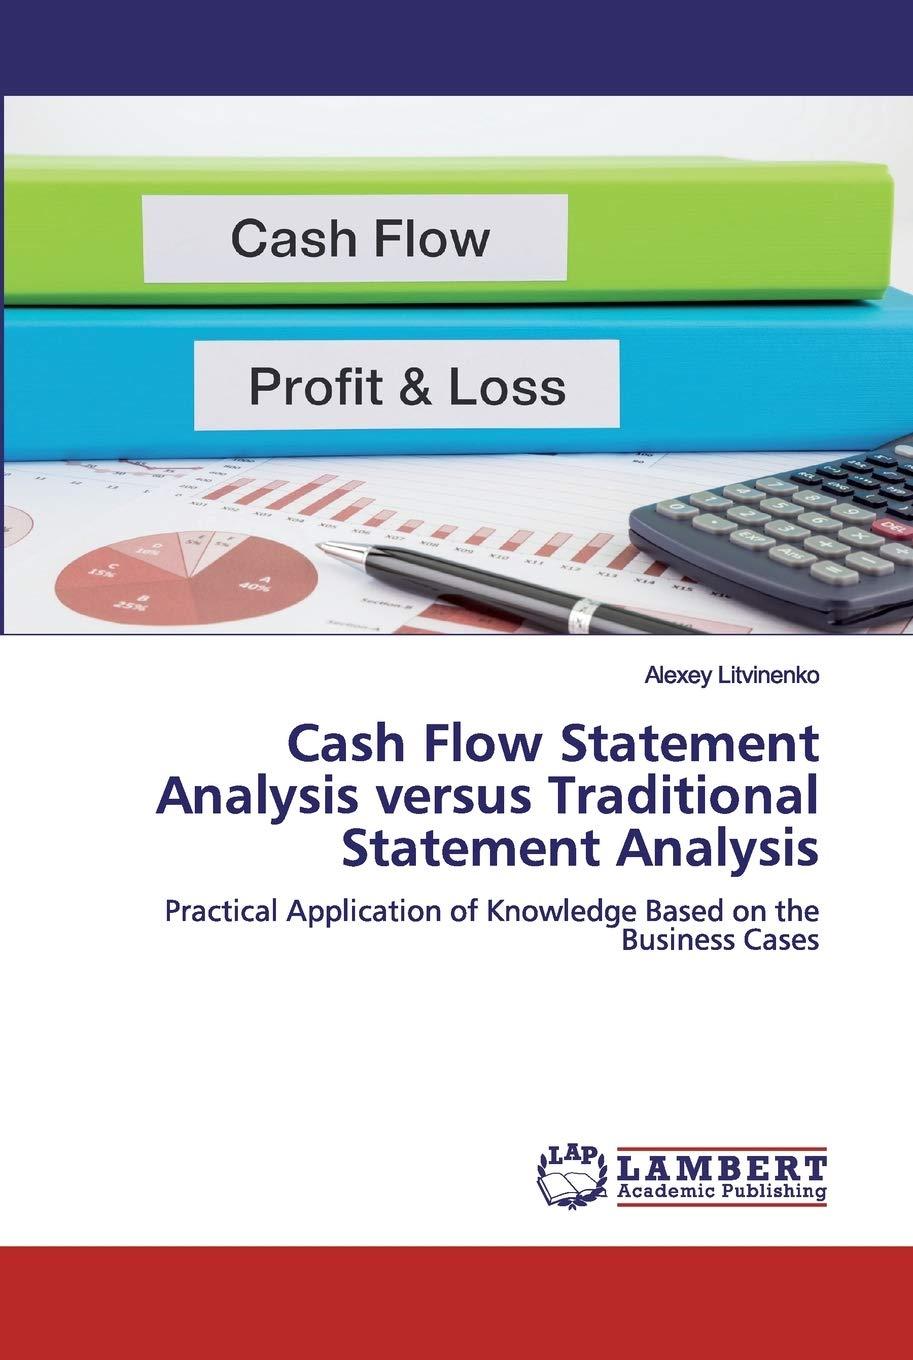 cash flow statement analysis versus traditional statement analysis practical application of knowledge based